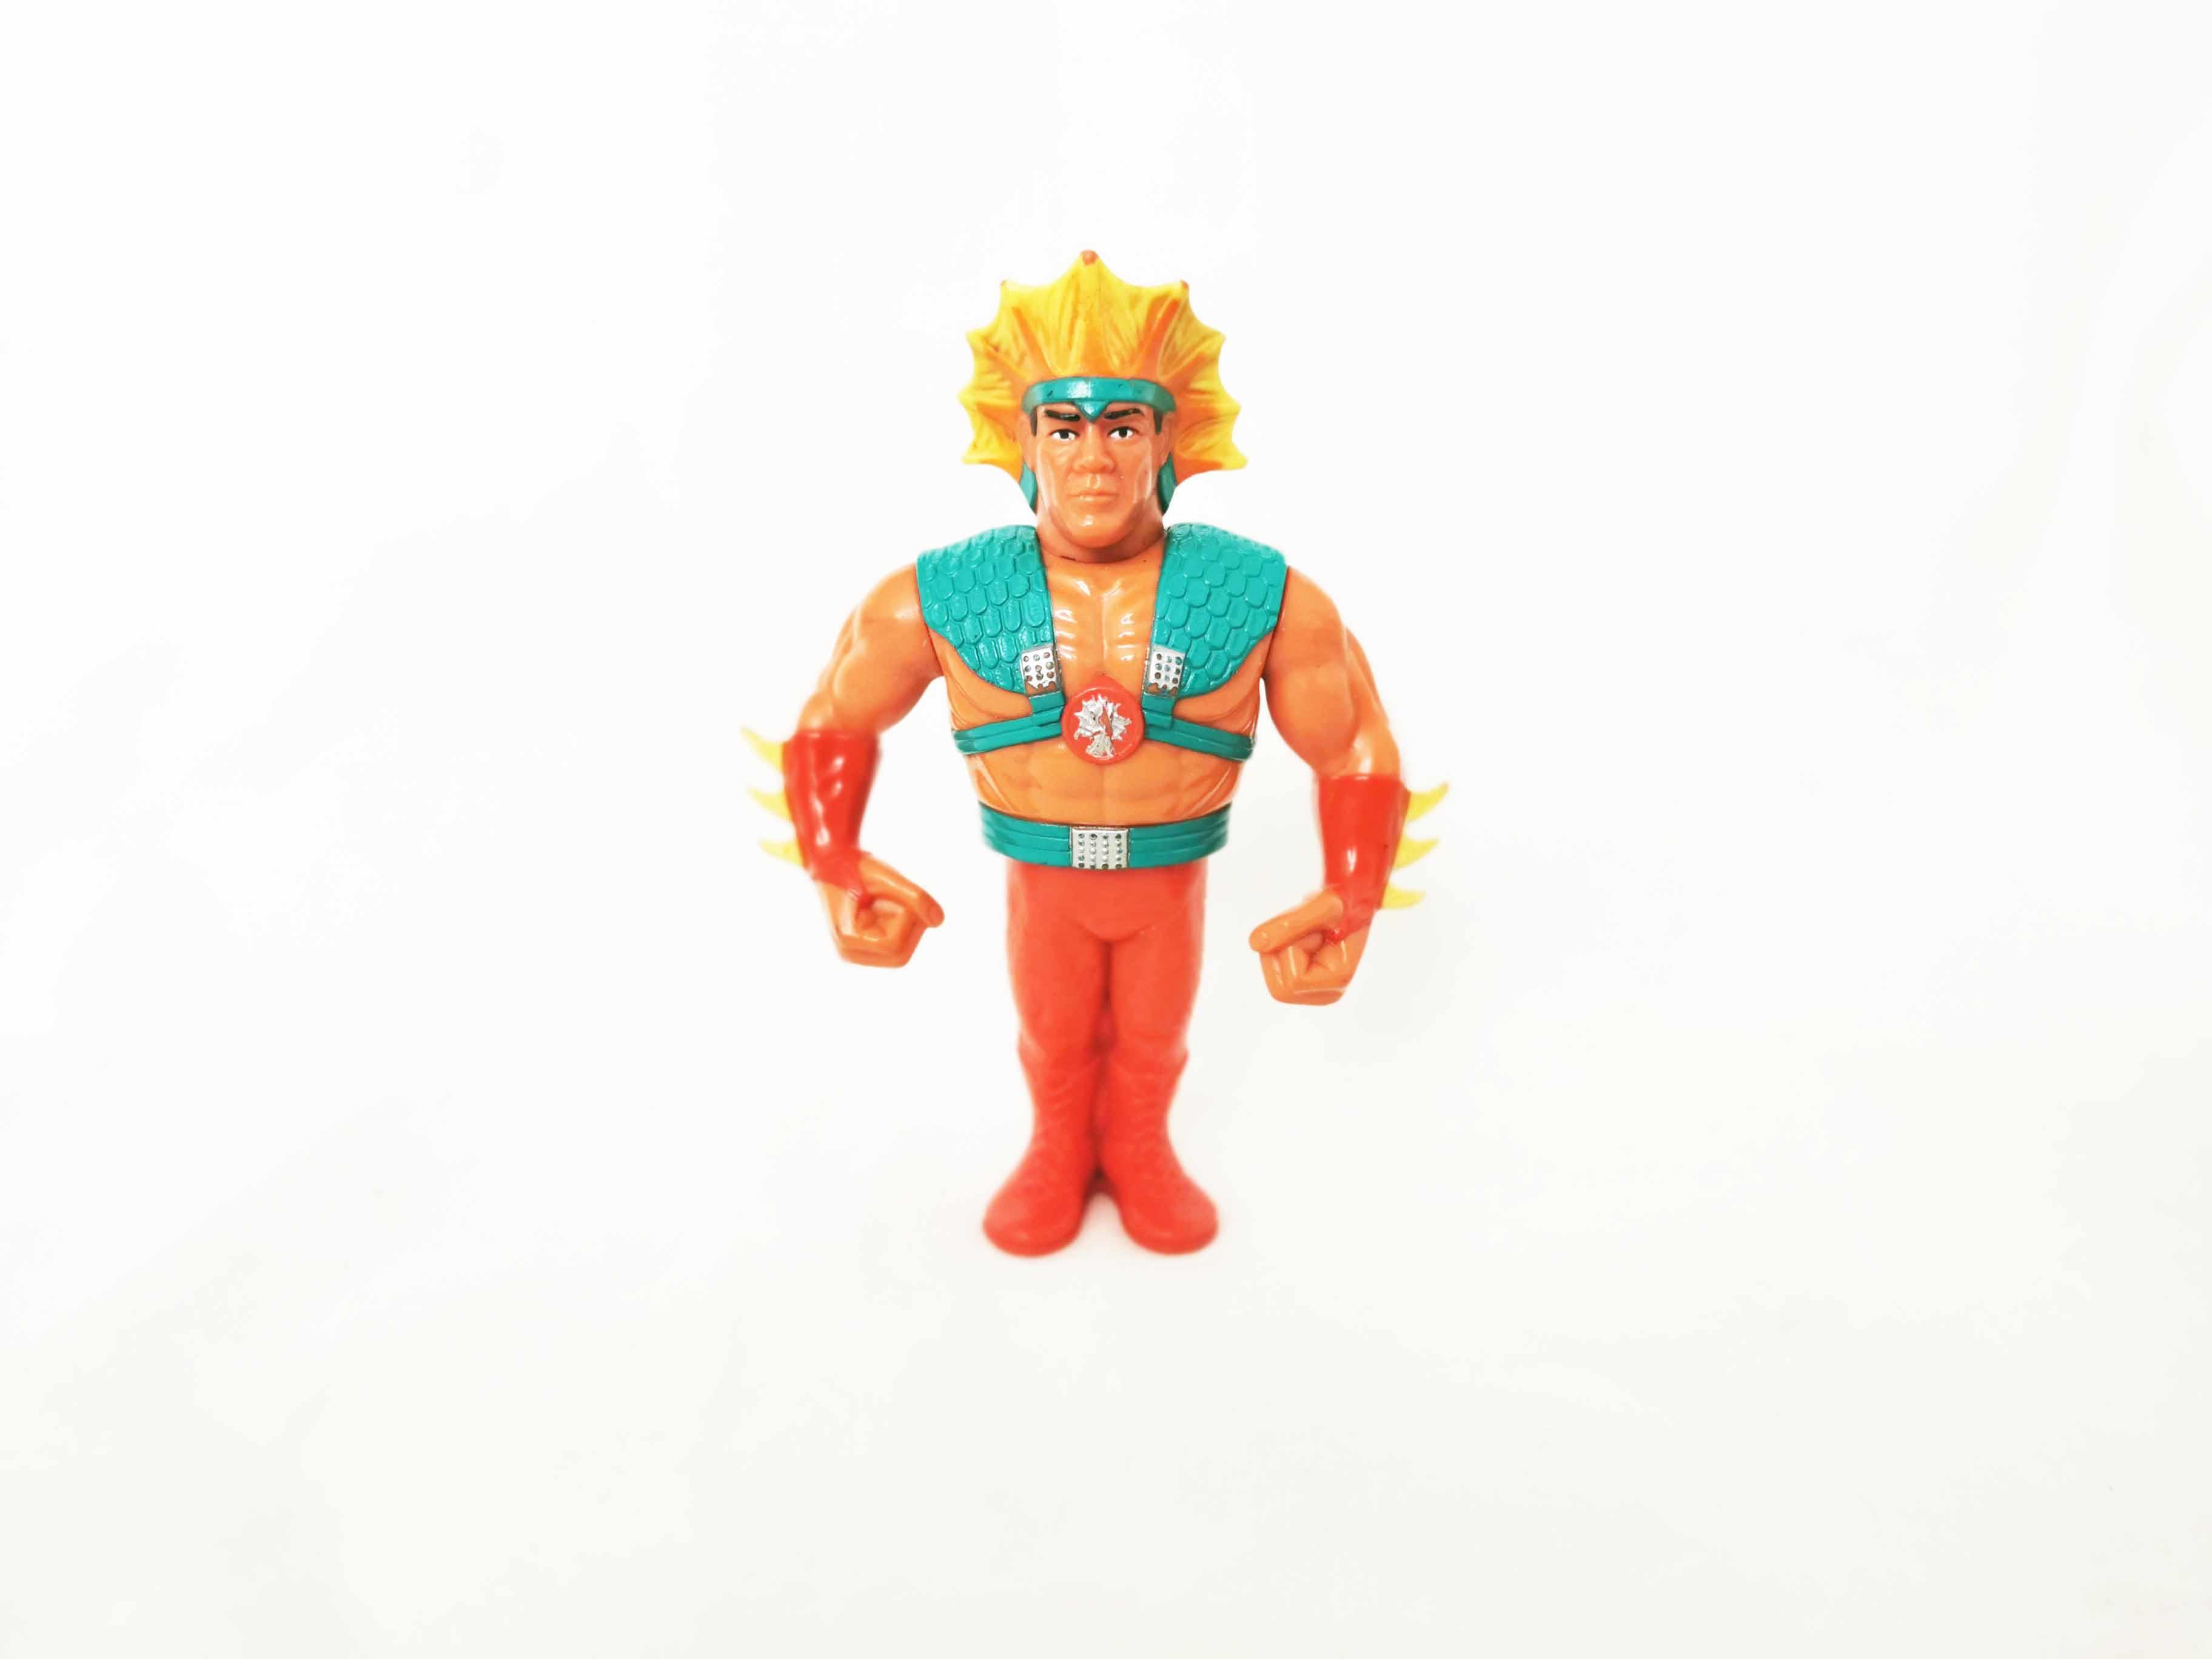 Ricky The Dragon Steamboat WWE WWF Wrestlingr 4 Loose Action Figure Hasbro